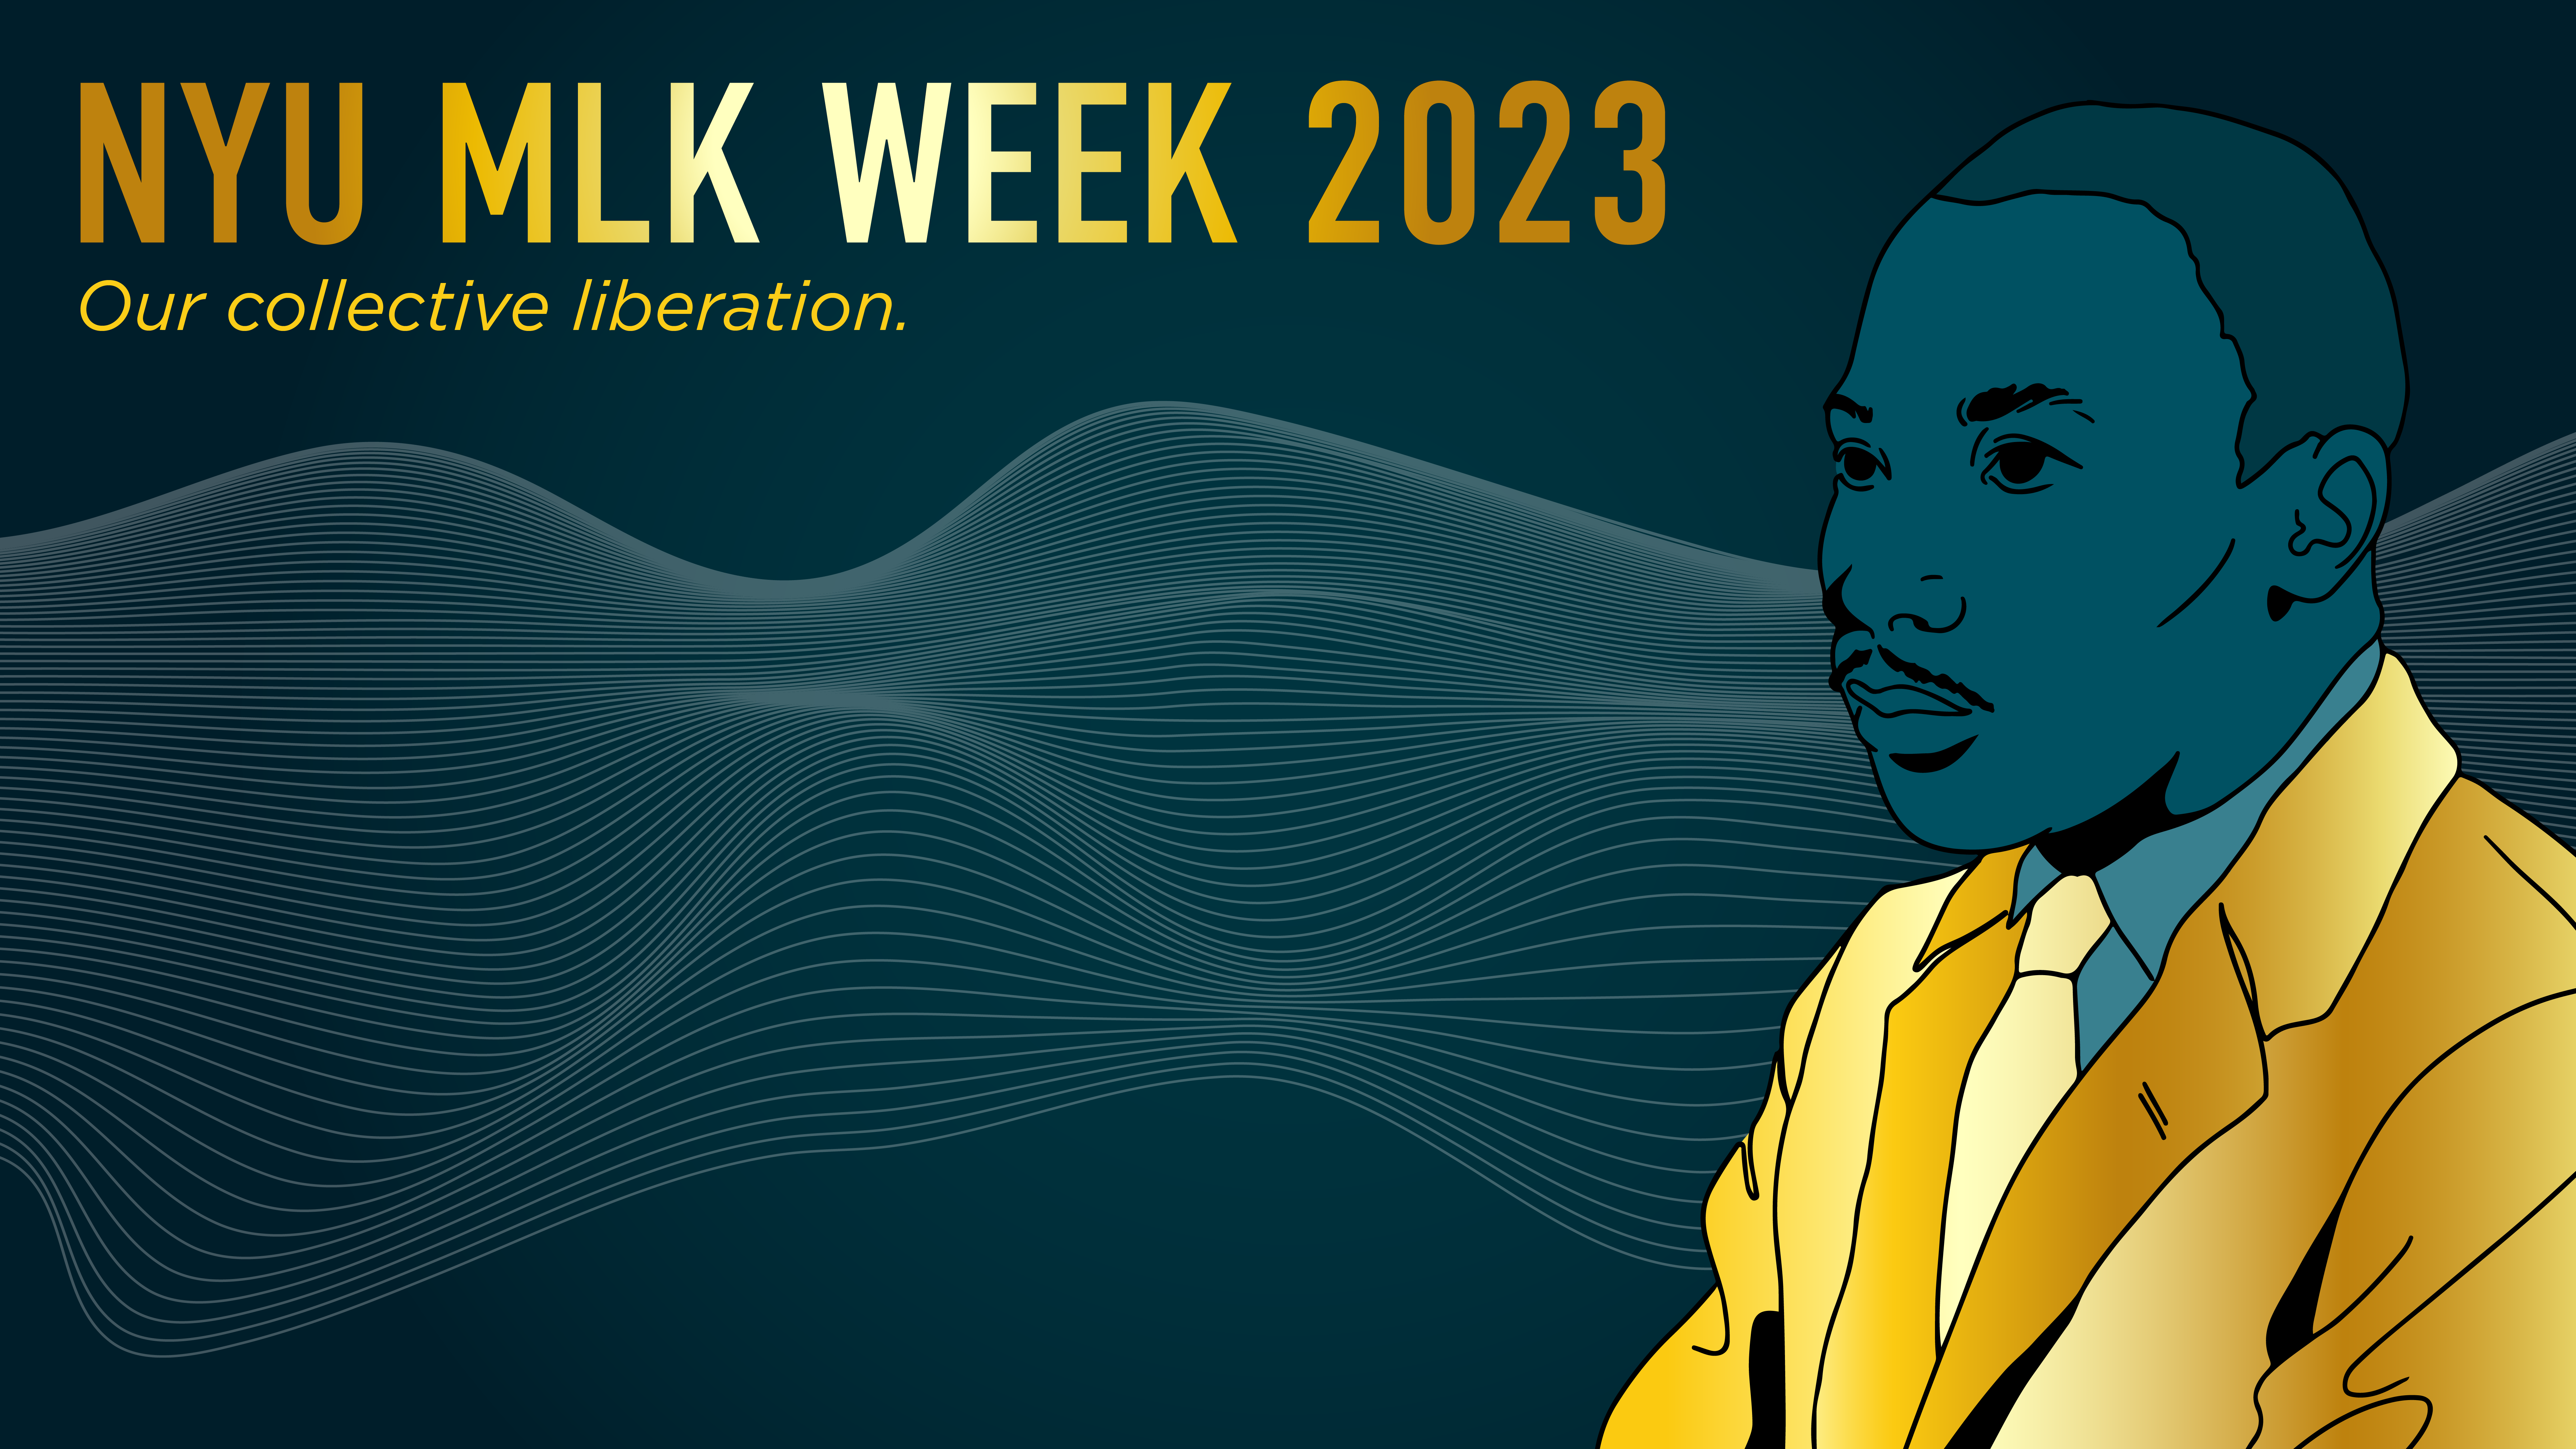 Illustration of Martin Luther King with text that reads “NYU MLK WEEK 2023: Our collective liberation.”